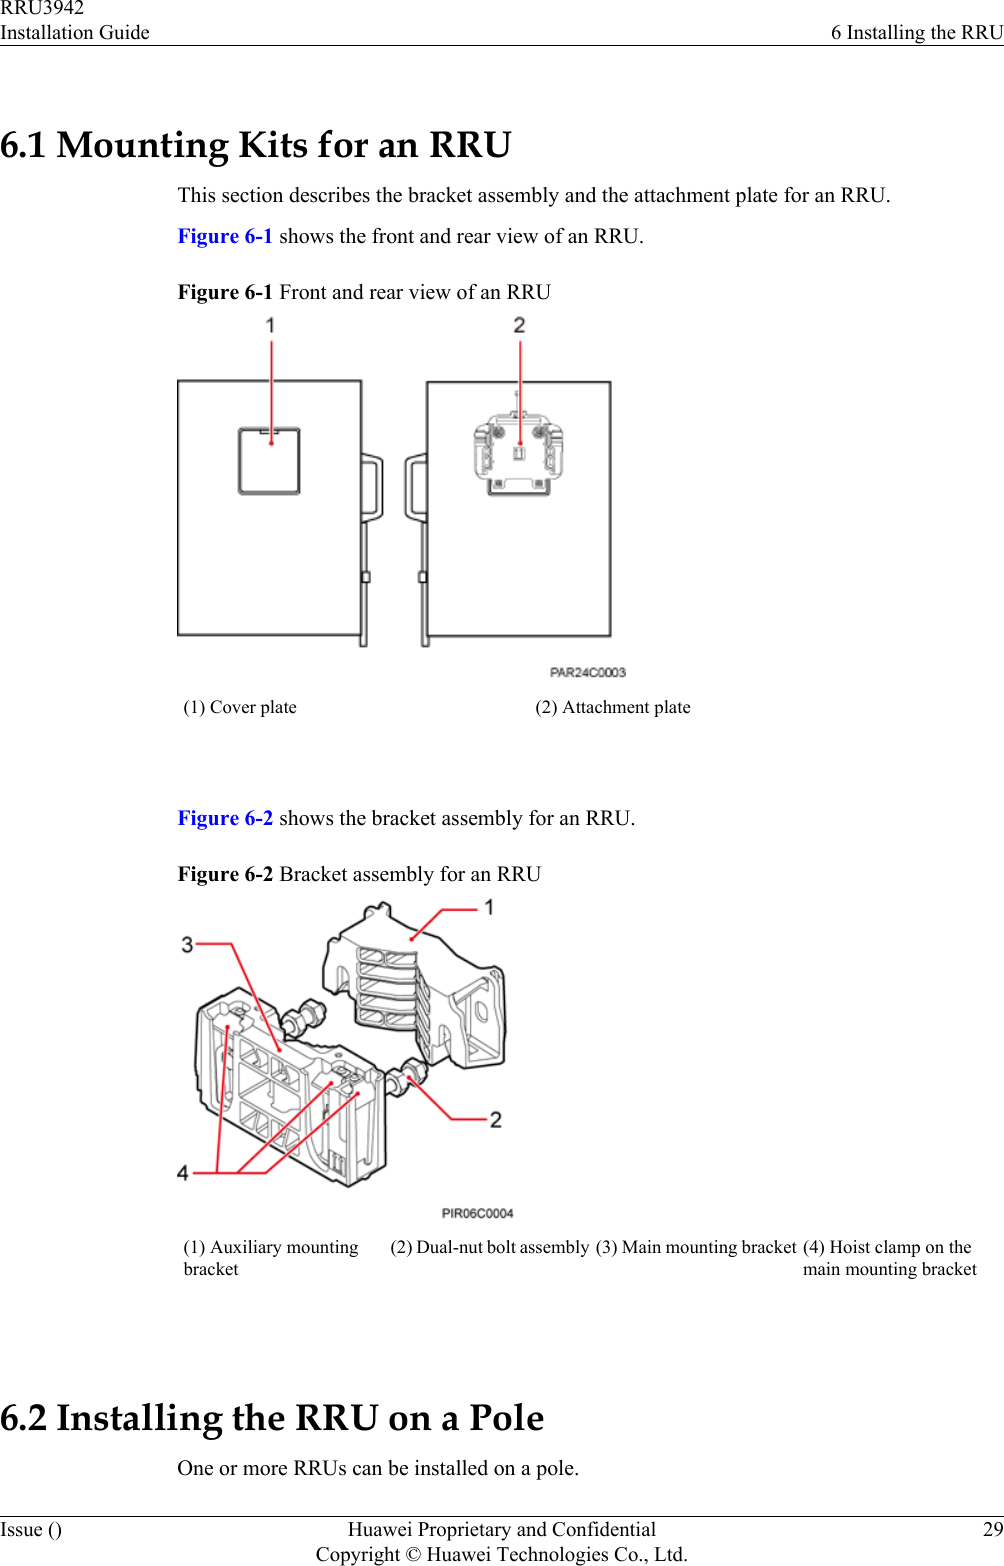 6.1 Mounting Kits for an RRUThis section describes the bracket assembly and the attachment plate for an RRU.Figure 6-1 shows the front and rear view of an RRU.Figure 6-1 Front and rear view of an RRU(1) Cover plate (2) Attachment plate Figure 6-2 shows the bracket assembly for an RRU.Figure 6-2 Bracket assembly for an RRU(1) Auxiliary mountingbracket(2) Dual-nut bolt assembly (3) Main mounting bracket (4) Hoist clamp on themain mounting bracket 6.2 Installing the RRU on a PoleOne or more RRUs can be installed on a pole.RRU3942Installation Guide 6 Installing the RRUIssue () Huawei Proprietary and ConfidentialCopyright © Huawei Technologies Co., Ltd.29